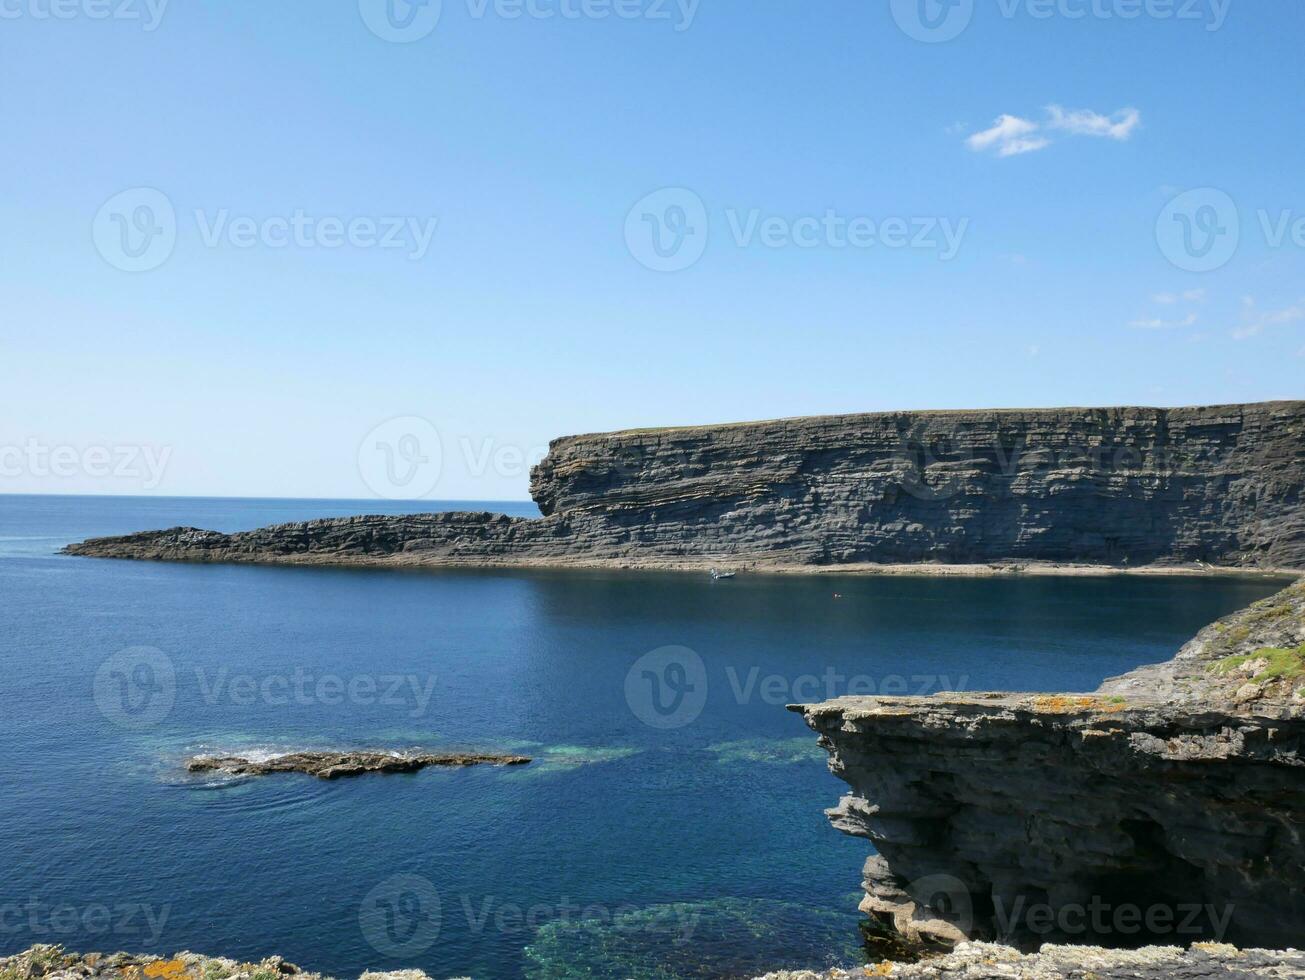 Cliffs and Atlantic ocean, rocks and laguna, beauty in nature. Summer vacation trip background photo